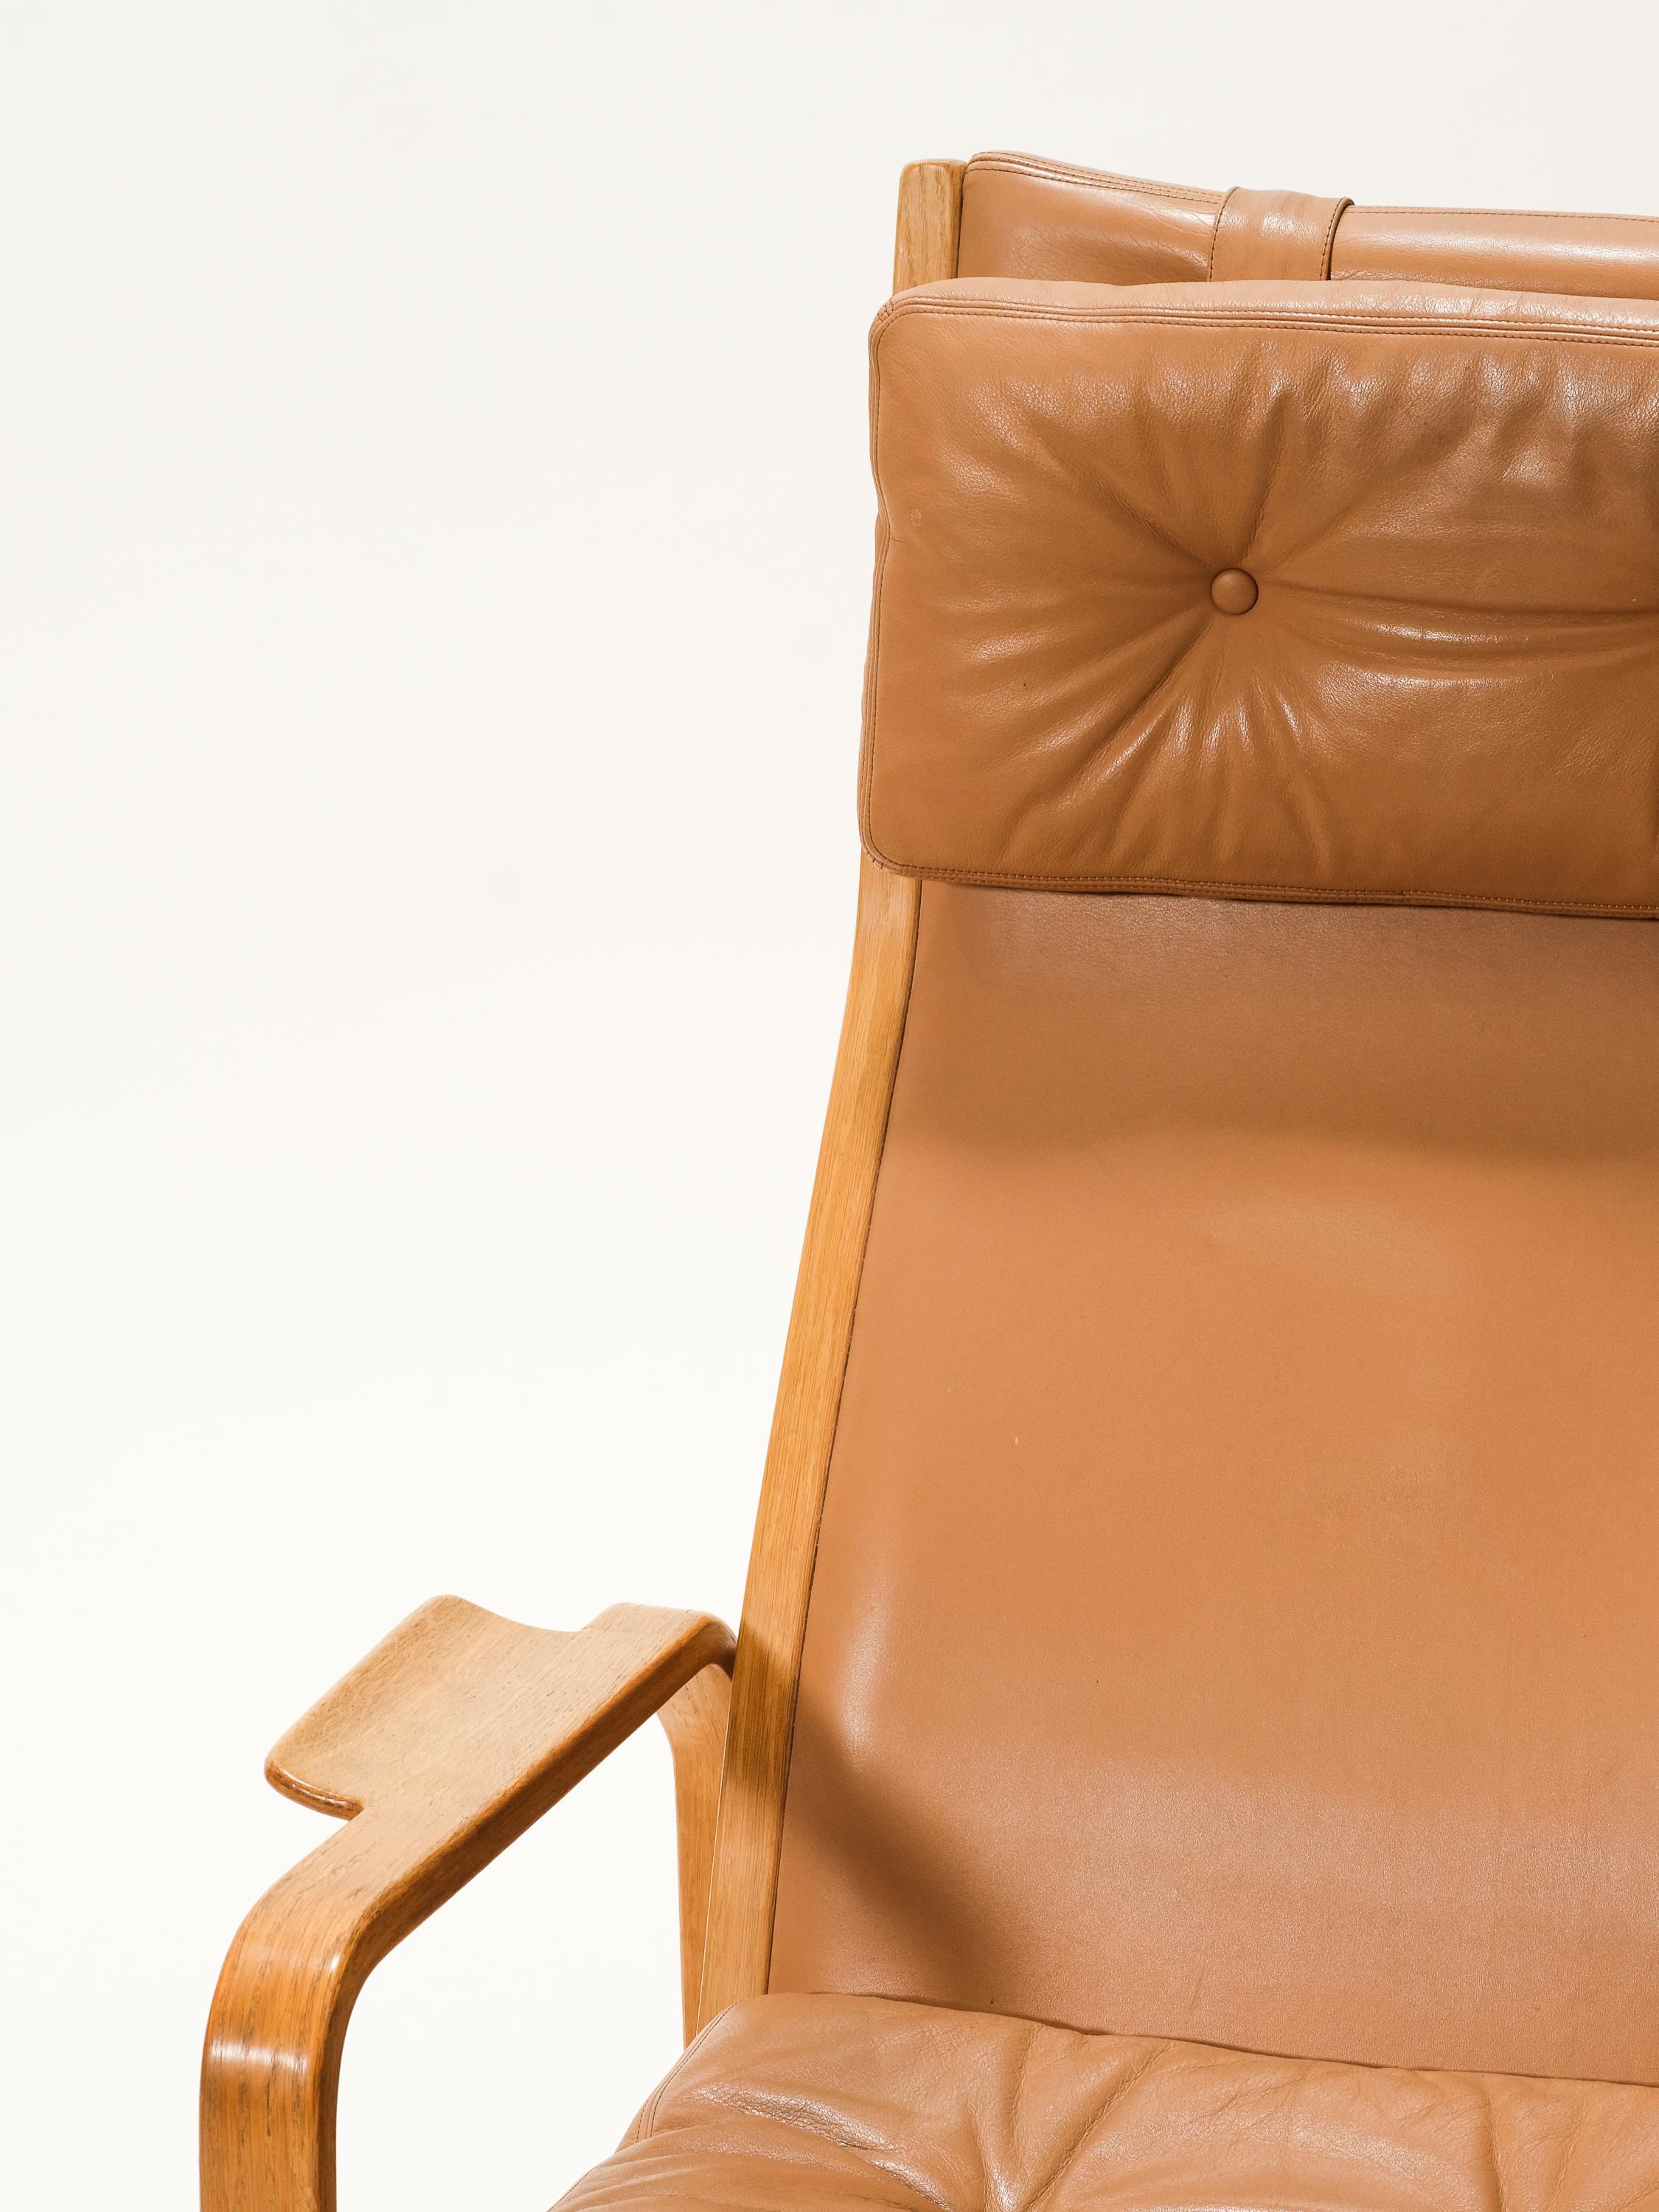 Swedish Mid-Century Oak & Leather Lounge Chair by Yngve Ekström for Swedese, 1960s For Sale